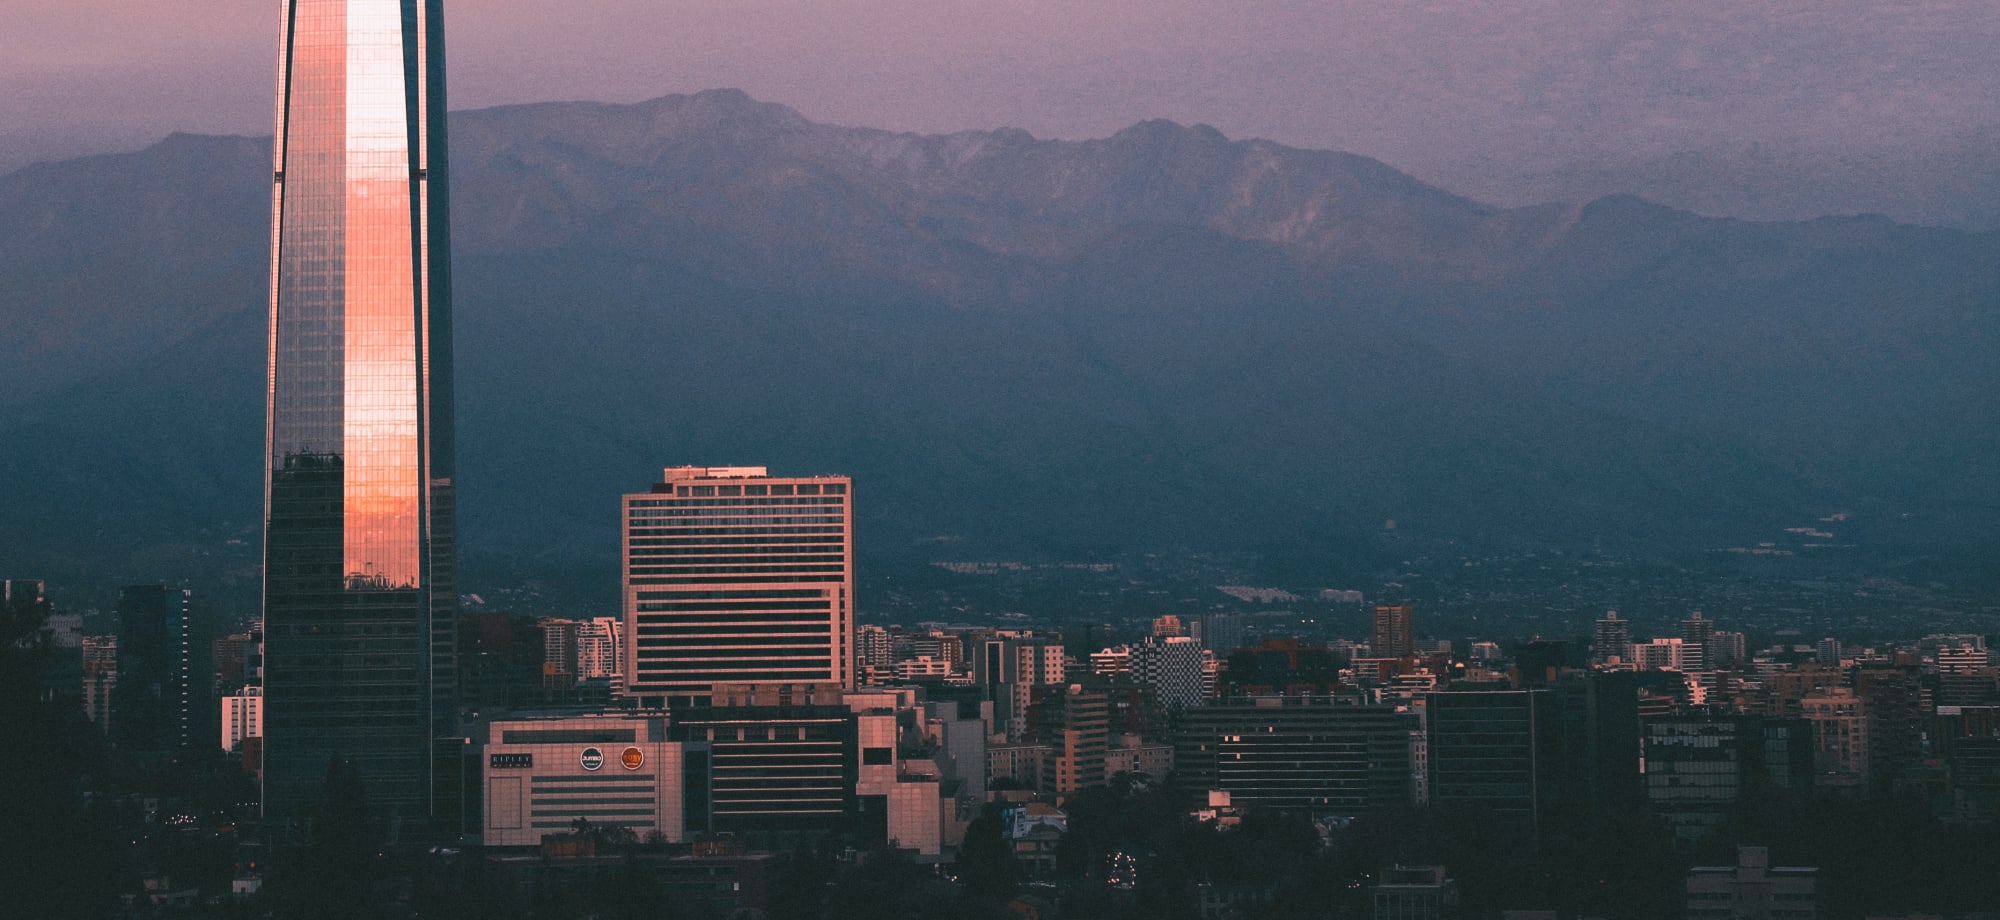 As the sun sets in Santiago, the city's skyscrapers are illuminated with an orange glow while the Andes in the background descend into darkness.